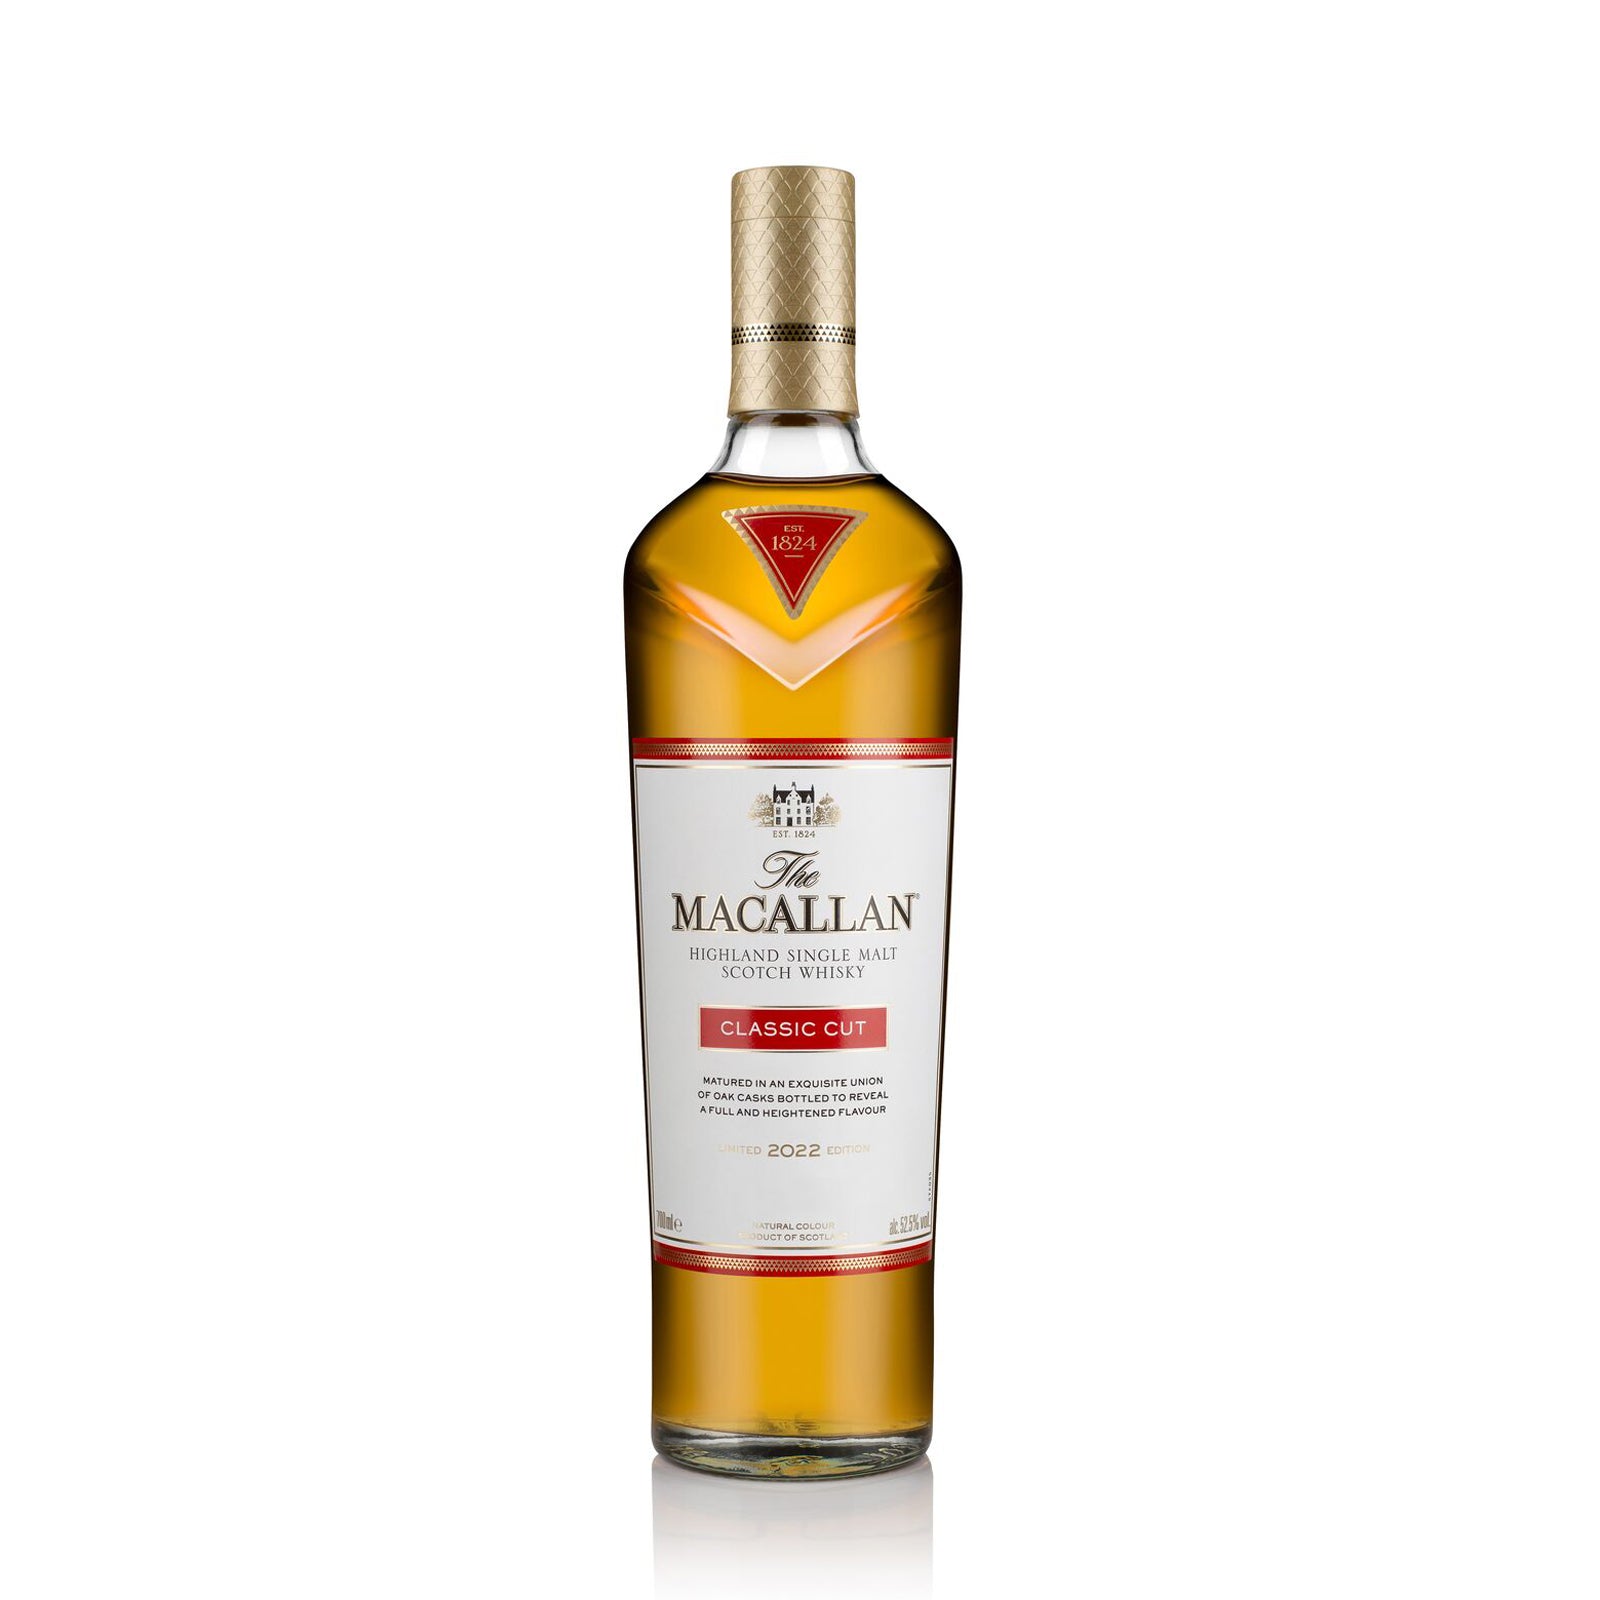 The Macallan Classic Cut 2022 Scotch Whisky 700ml * Complimentary 3-course whisky pairing dinner at Imbue with every 2 bottles purchased